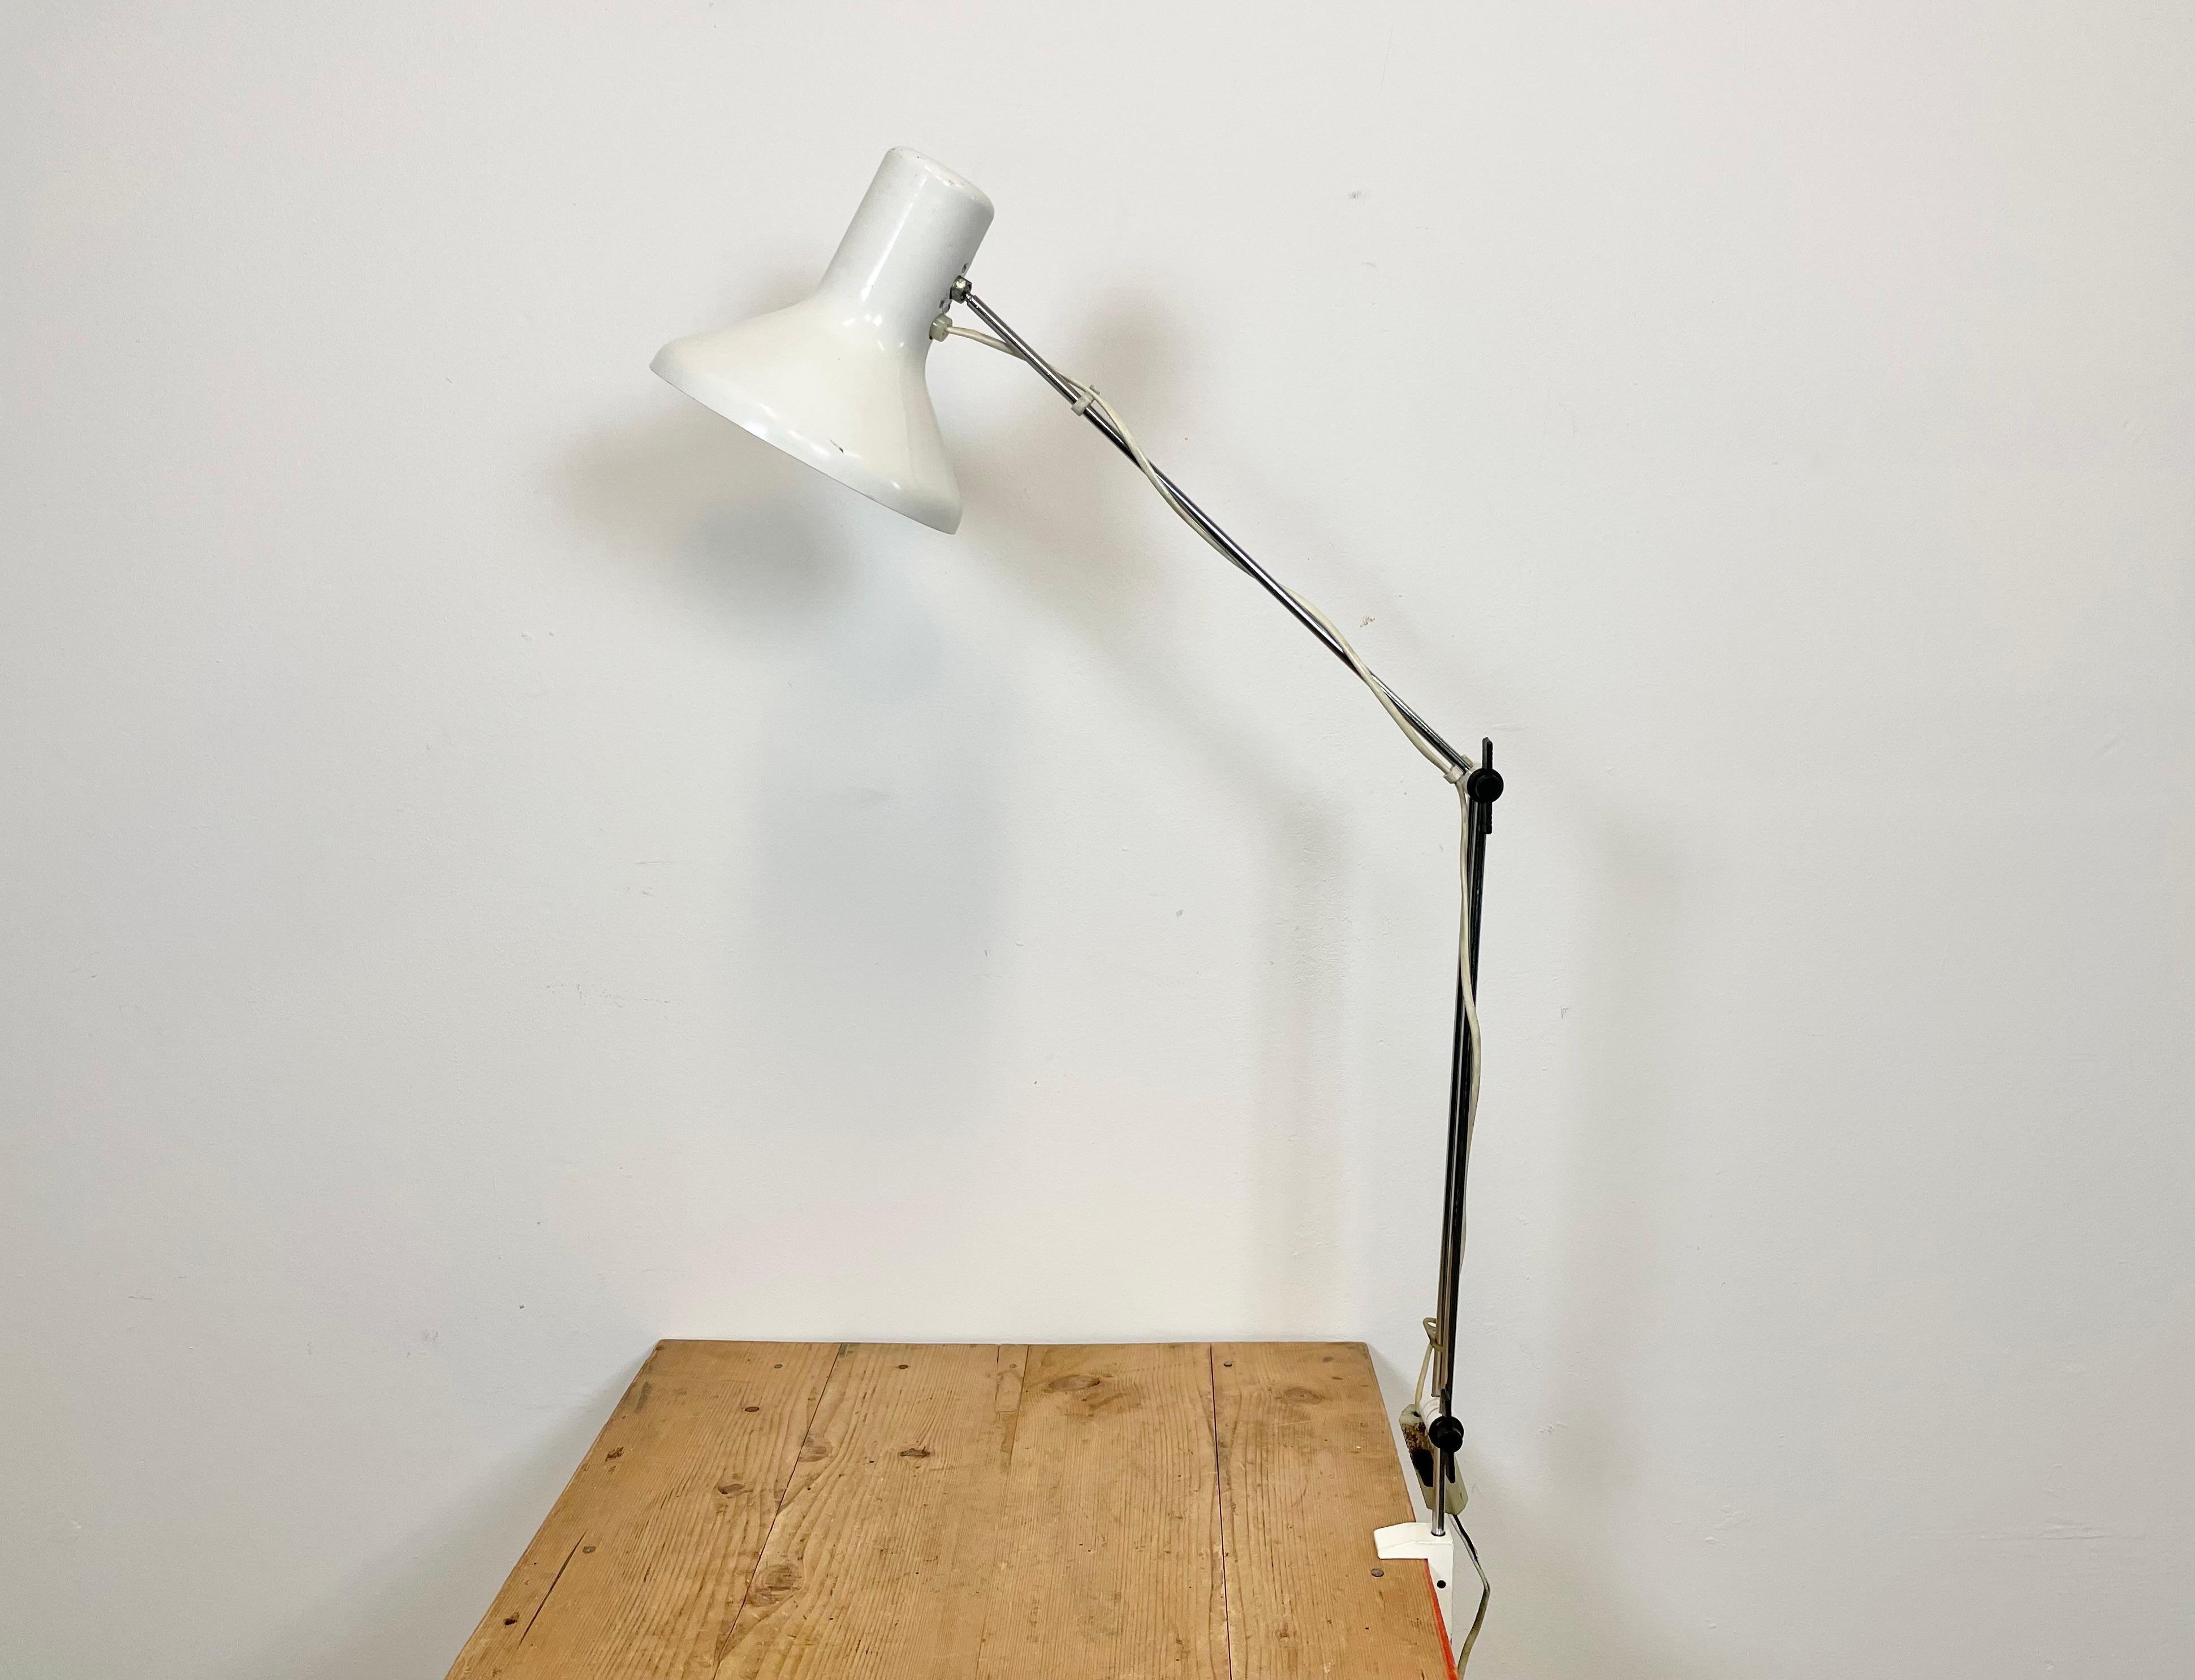 Vintage adjustable table lamp designed by Josef Hurka and produced by Napako in former Czechoslovakia during the 1960s. It features an aluminium shade, a chrome plated arm with two adjustable joints and an iron clamp base. The porcelain socket